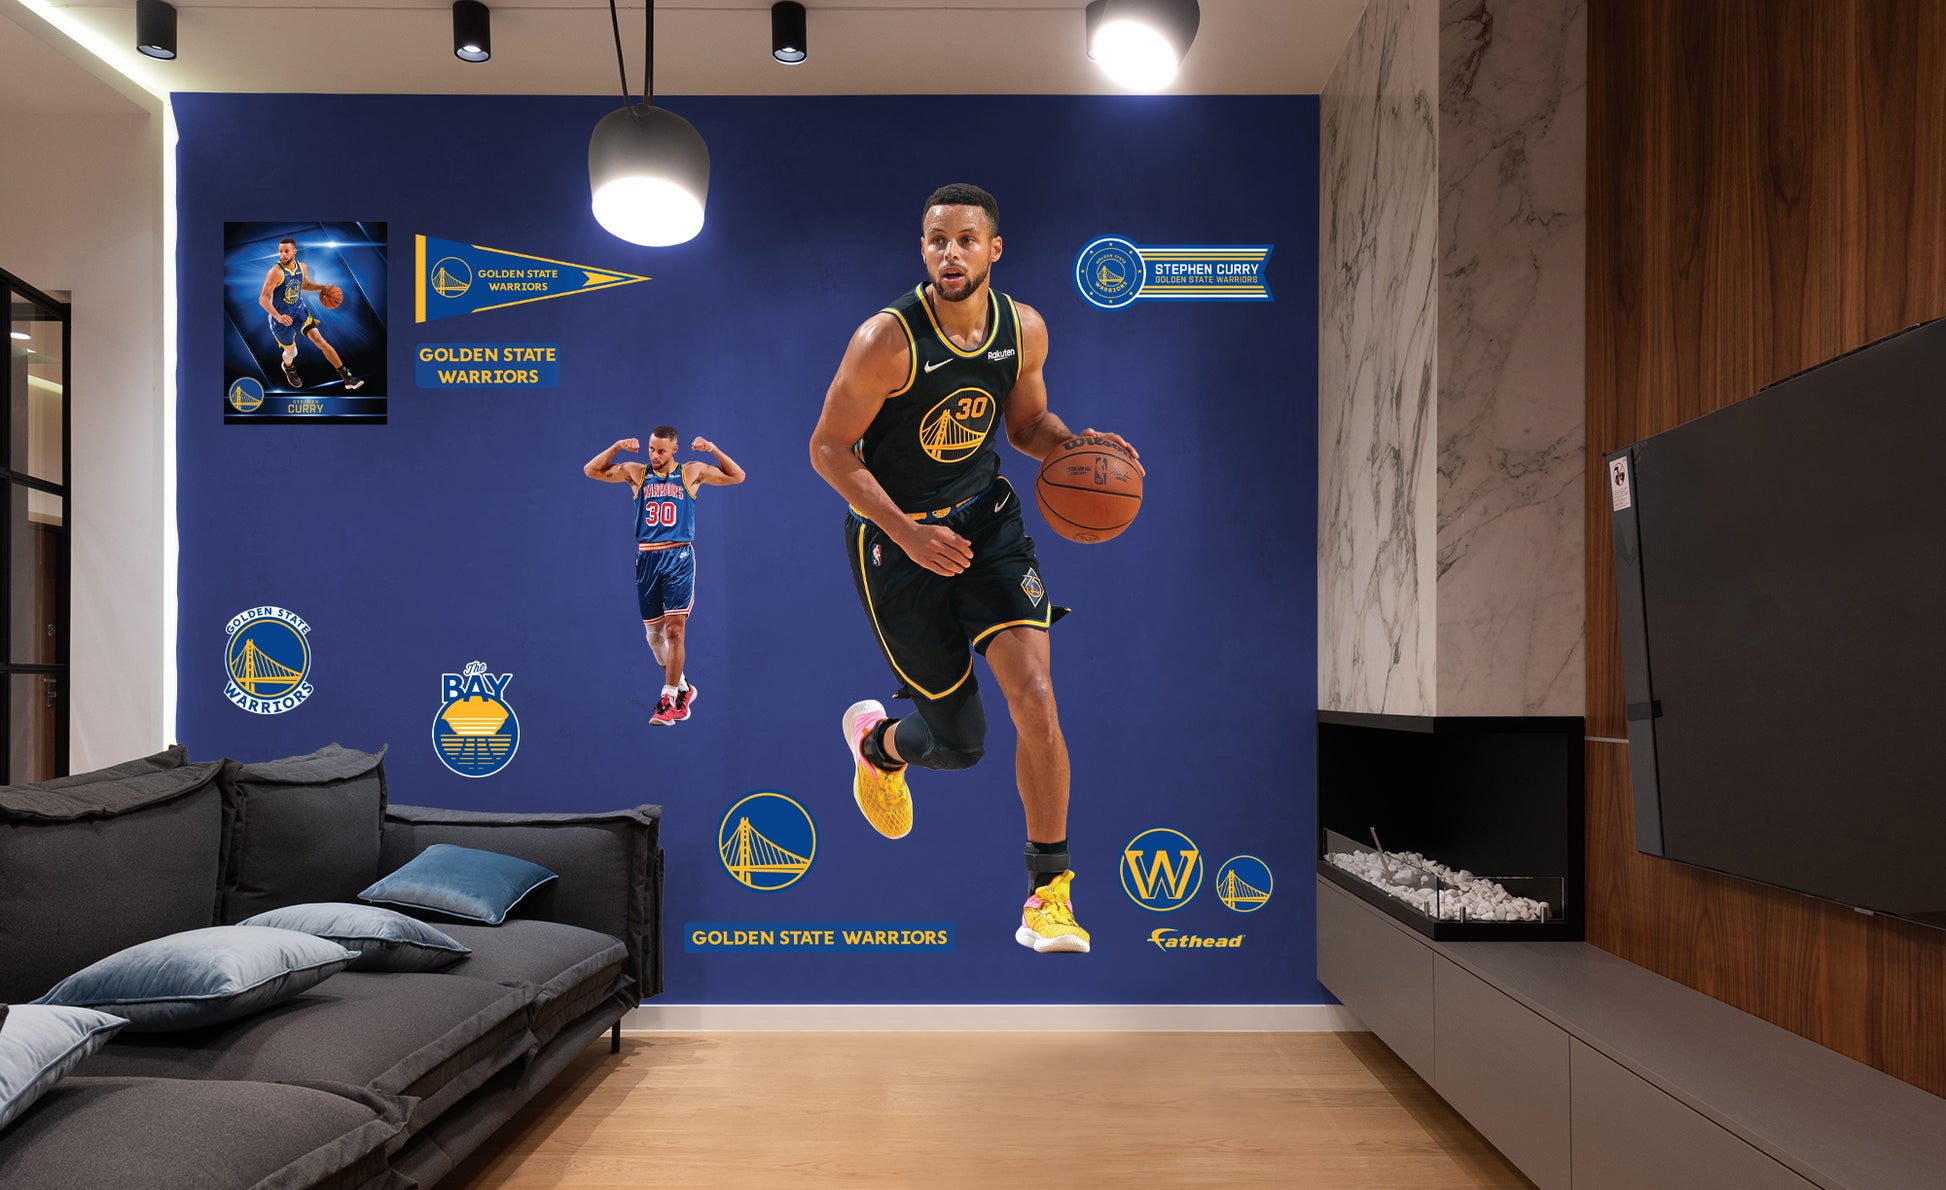 Golden State Warriors: Stephen Curry 2021 Oakland Jersey - NBA Removable Wall Adhesive Wall Decal XL